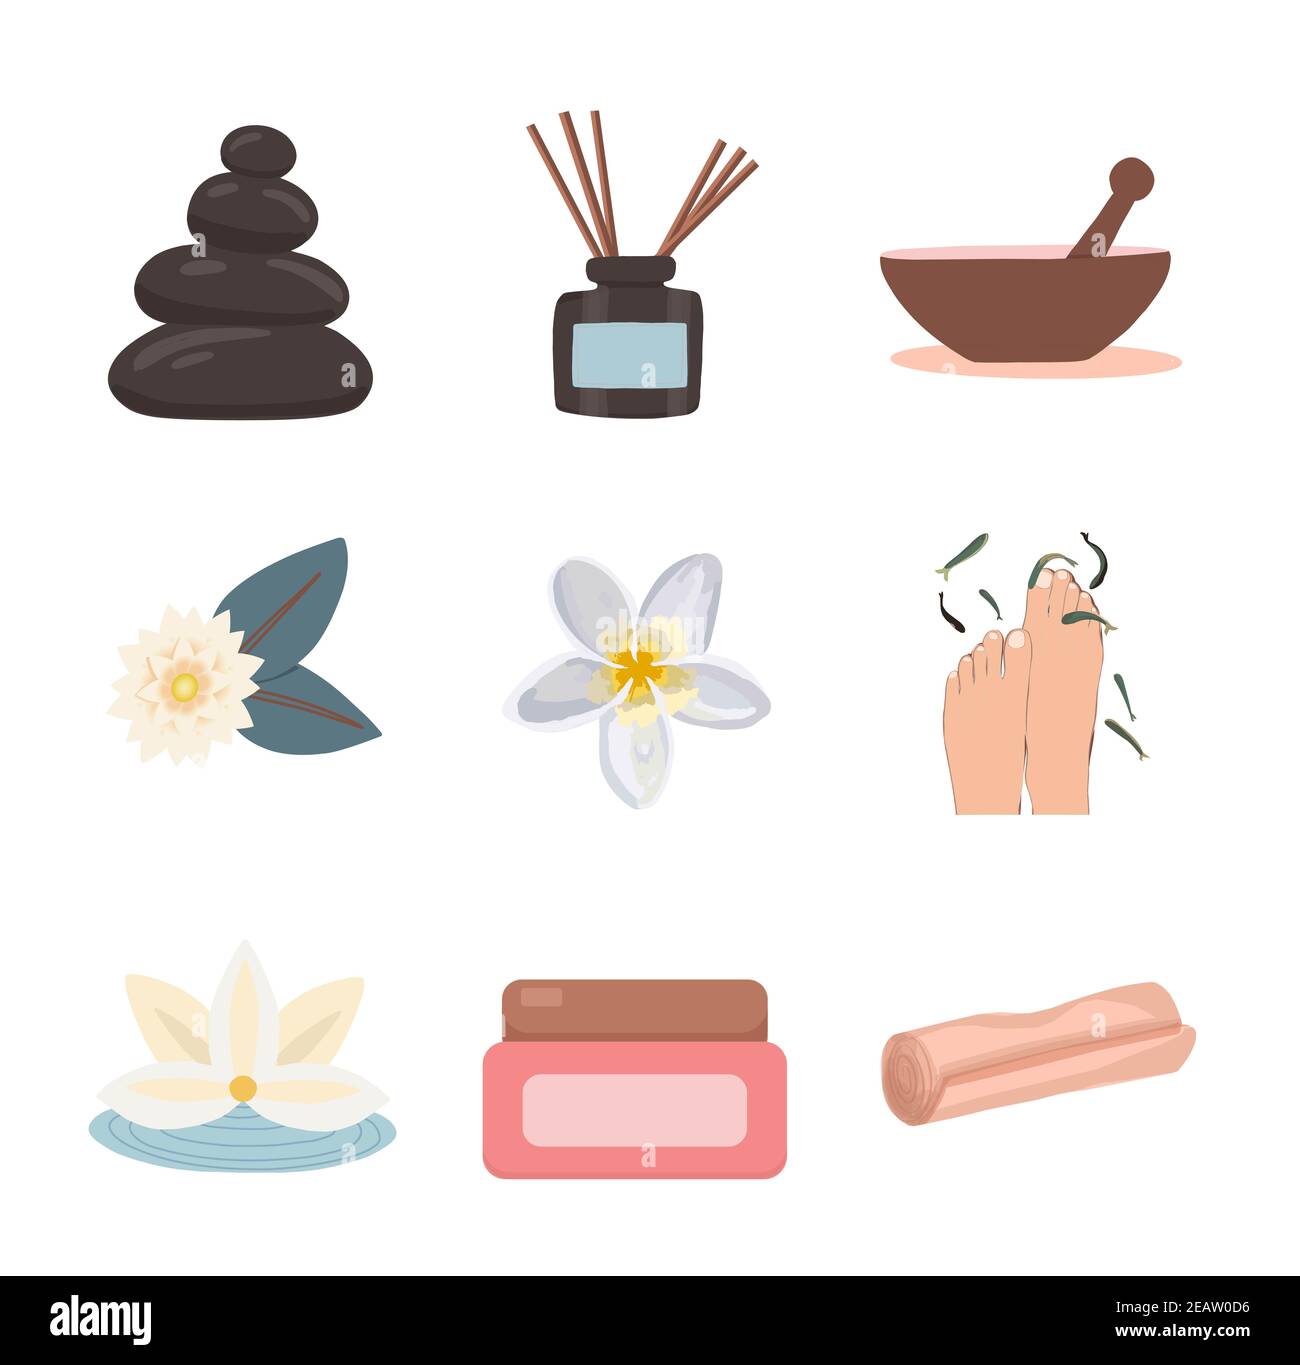 Set of flat vector illustrations of spa service. Items for spa treatments. Wellness center package of procedures and equipment. Hot stone massage, foot bath and green tea. Aromatherapy and fish peelin. Stock Photo